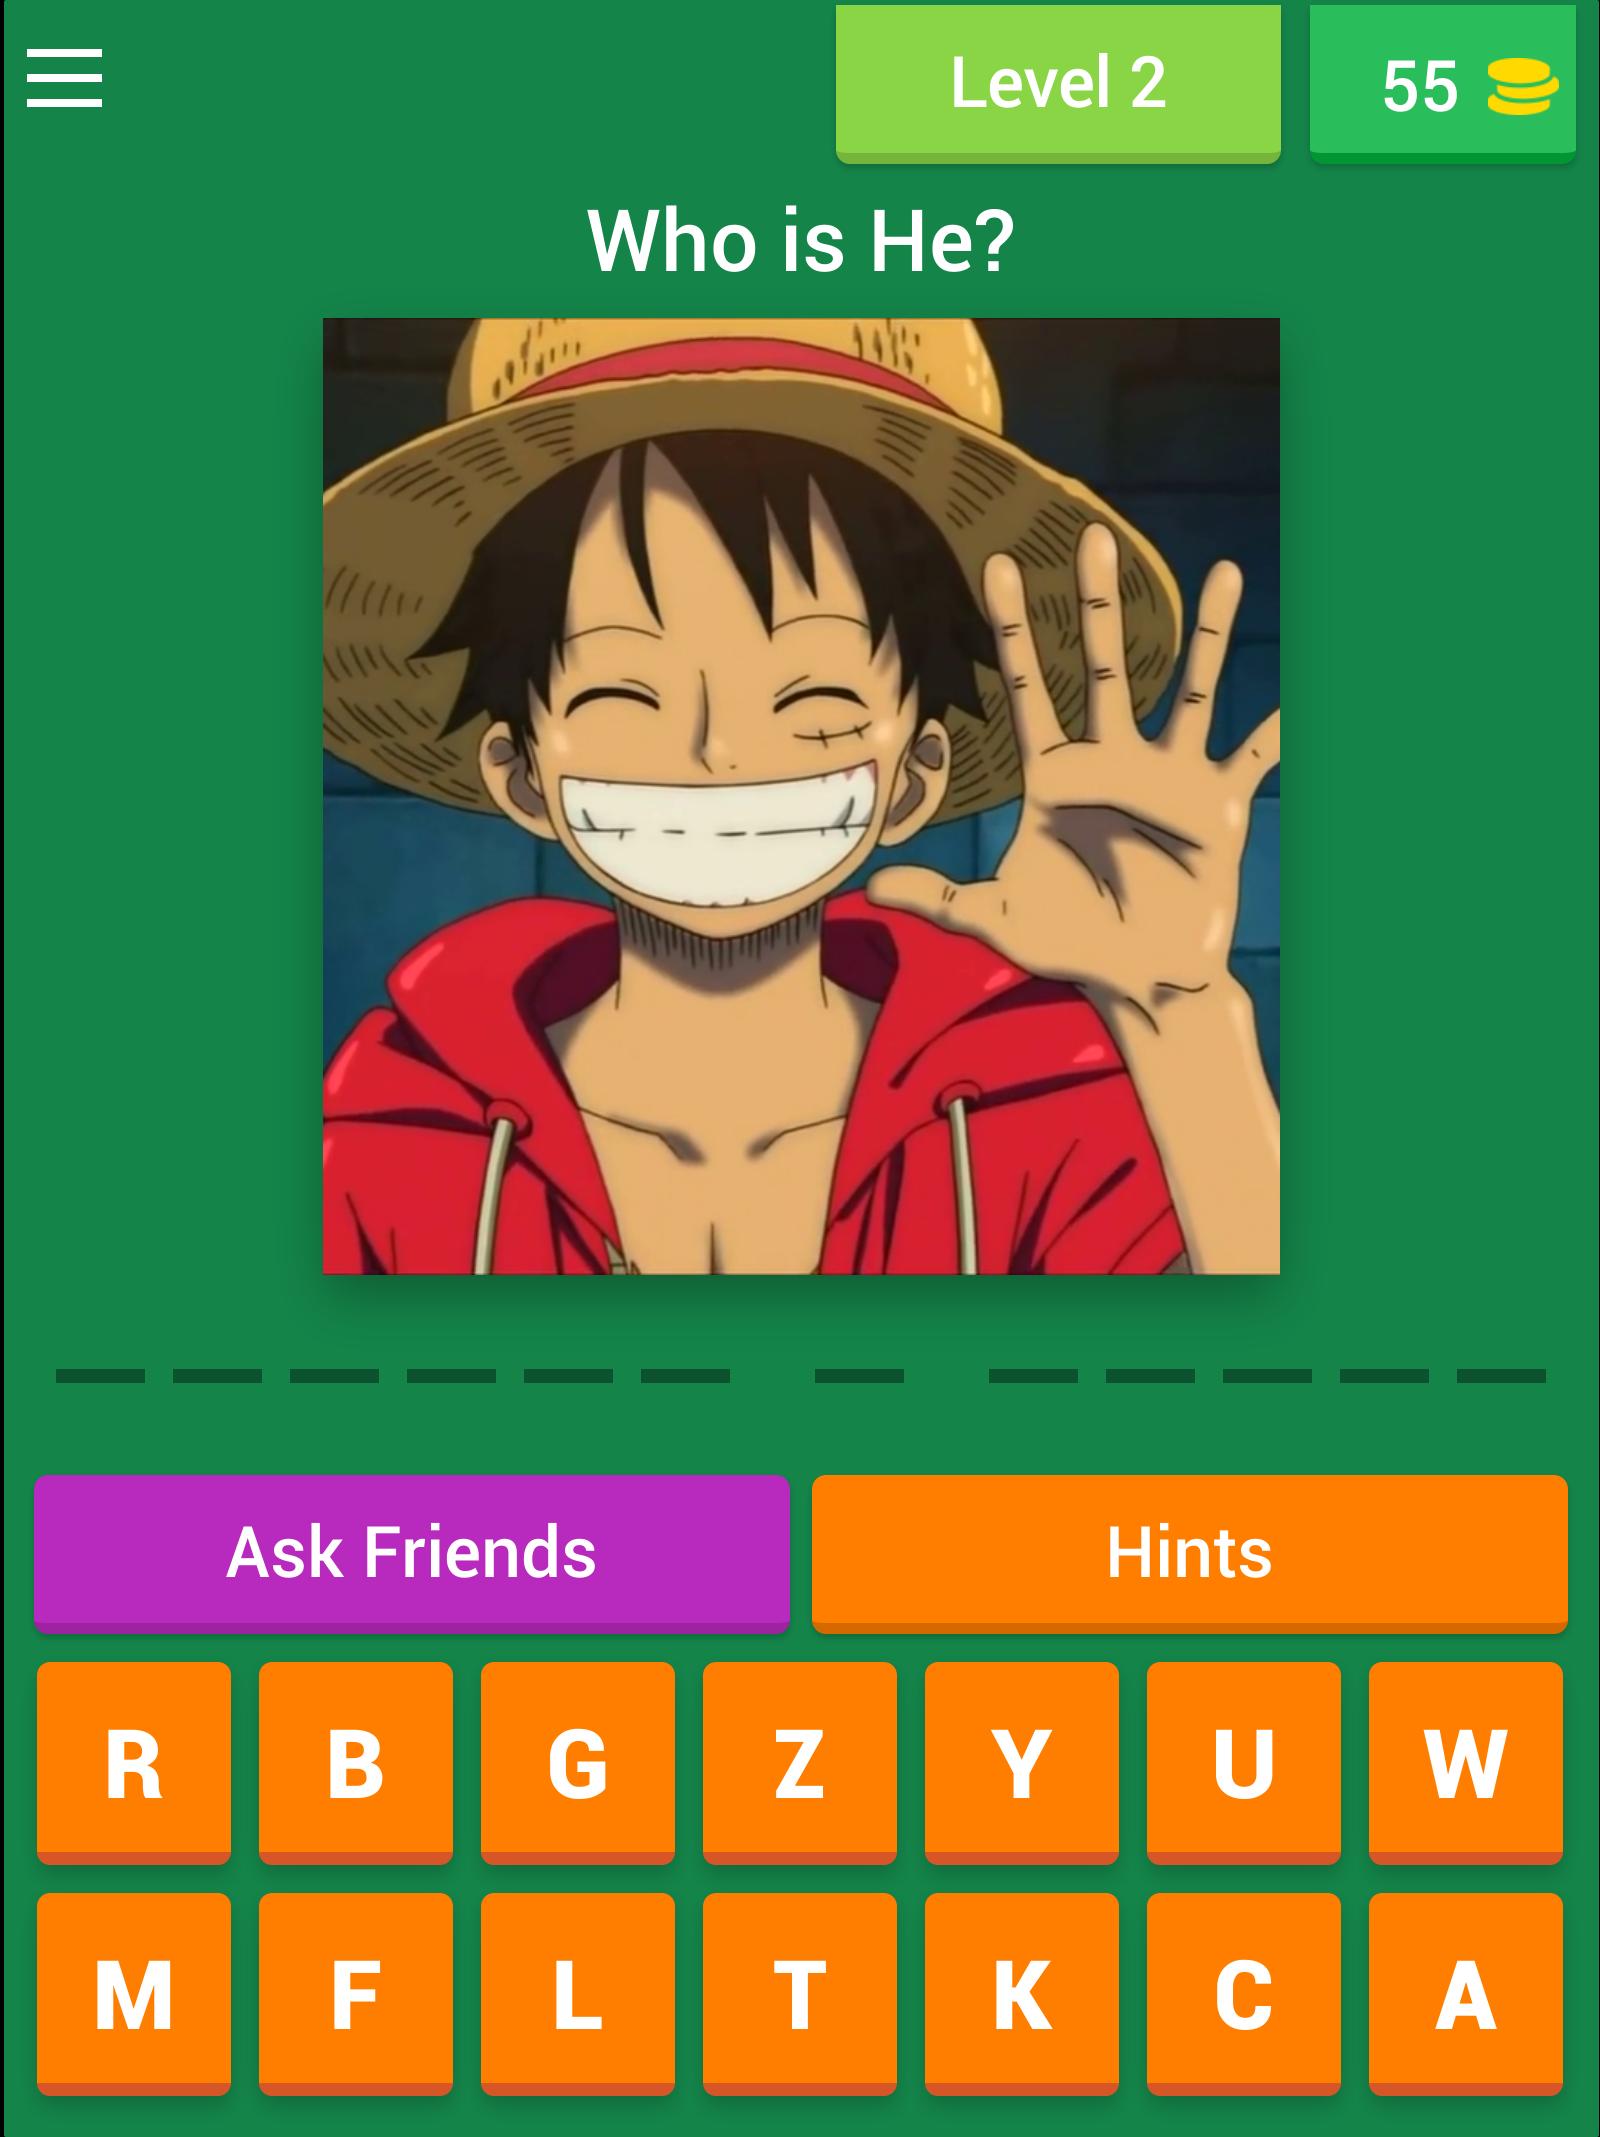 Who Am I Anime Version For Android Apk Download - name that character anime edition roblox